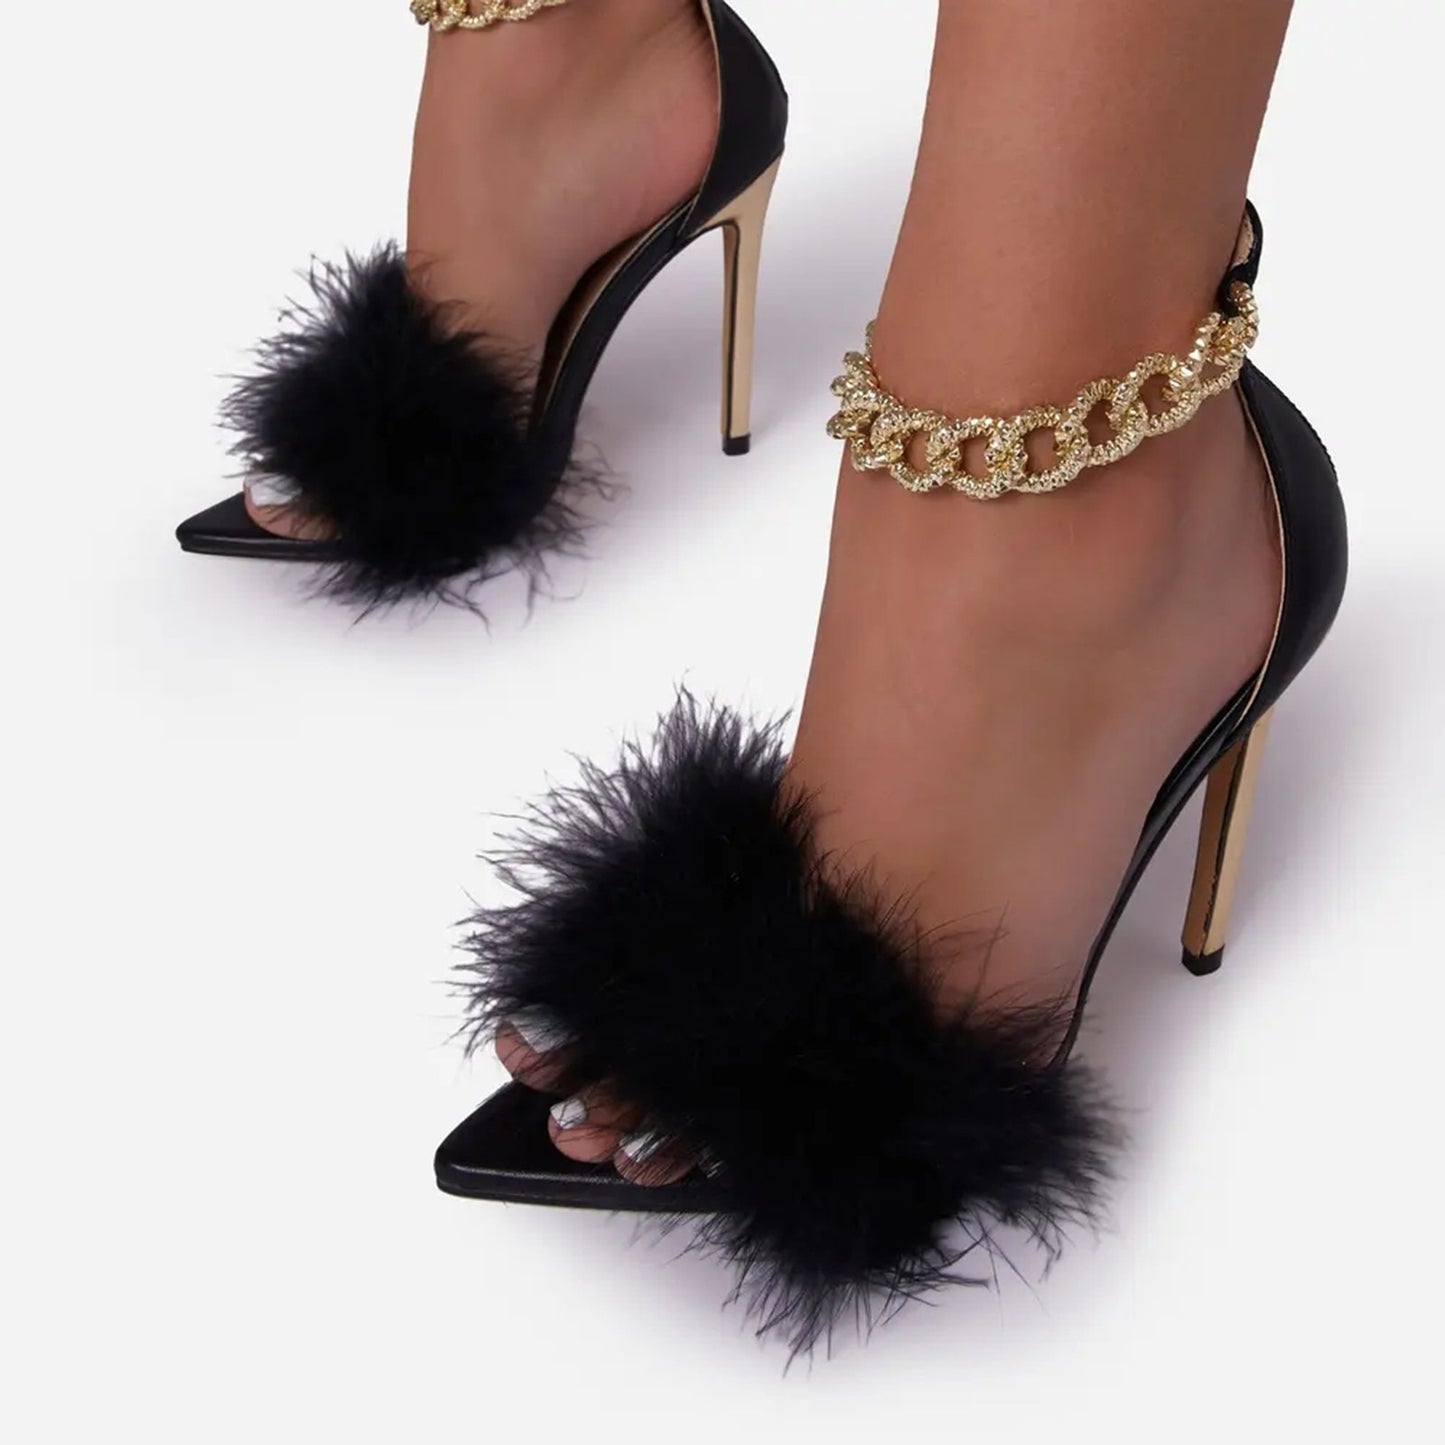 Black Feather Pointed-Toe Sandals With A Gold Ankle Strap